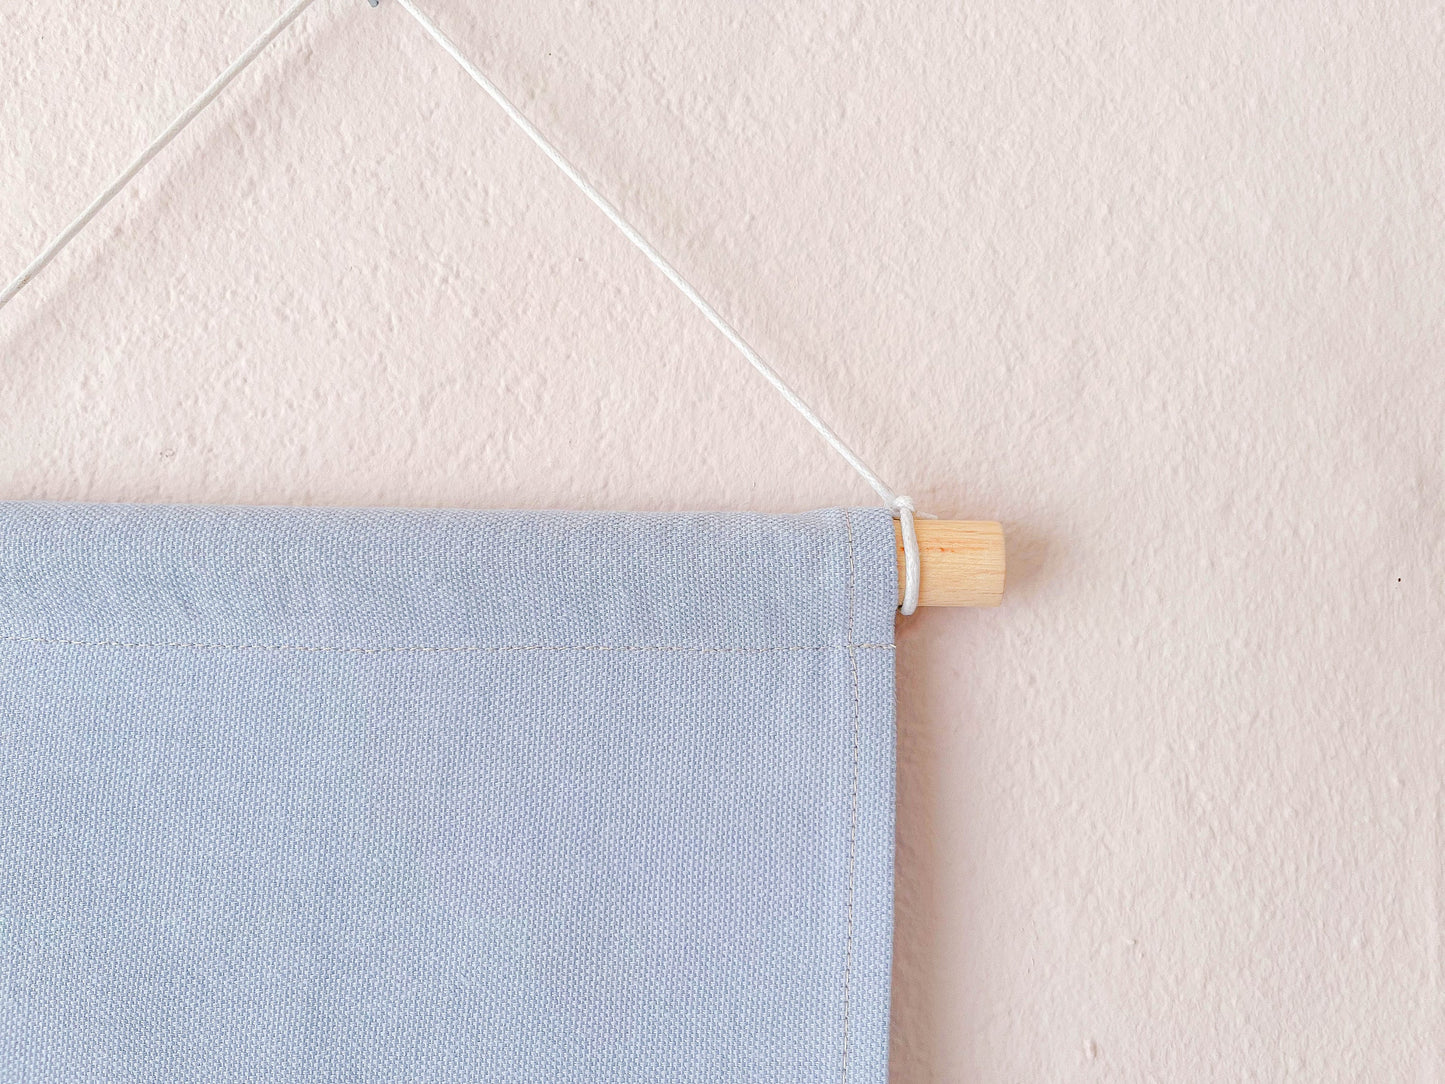 Cute Cotton Pin Banner | L 21cm x 30cm | Handmade in Germany | Light Blue Canvas Fabric | Classic Pin Display